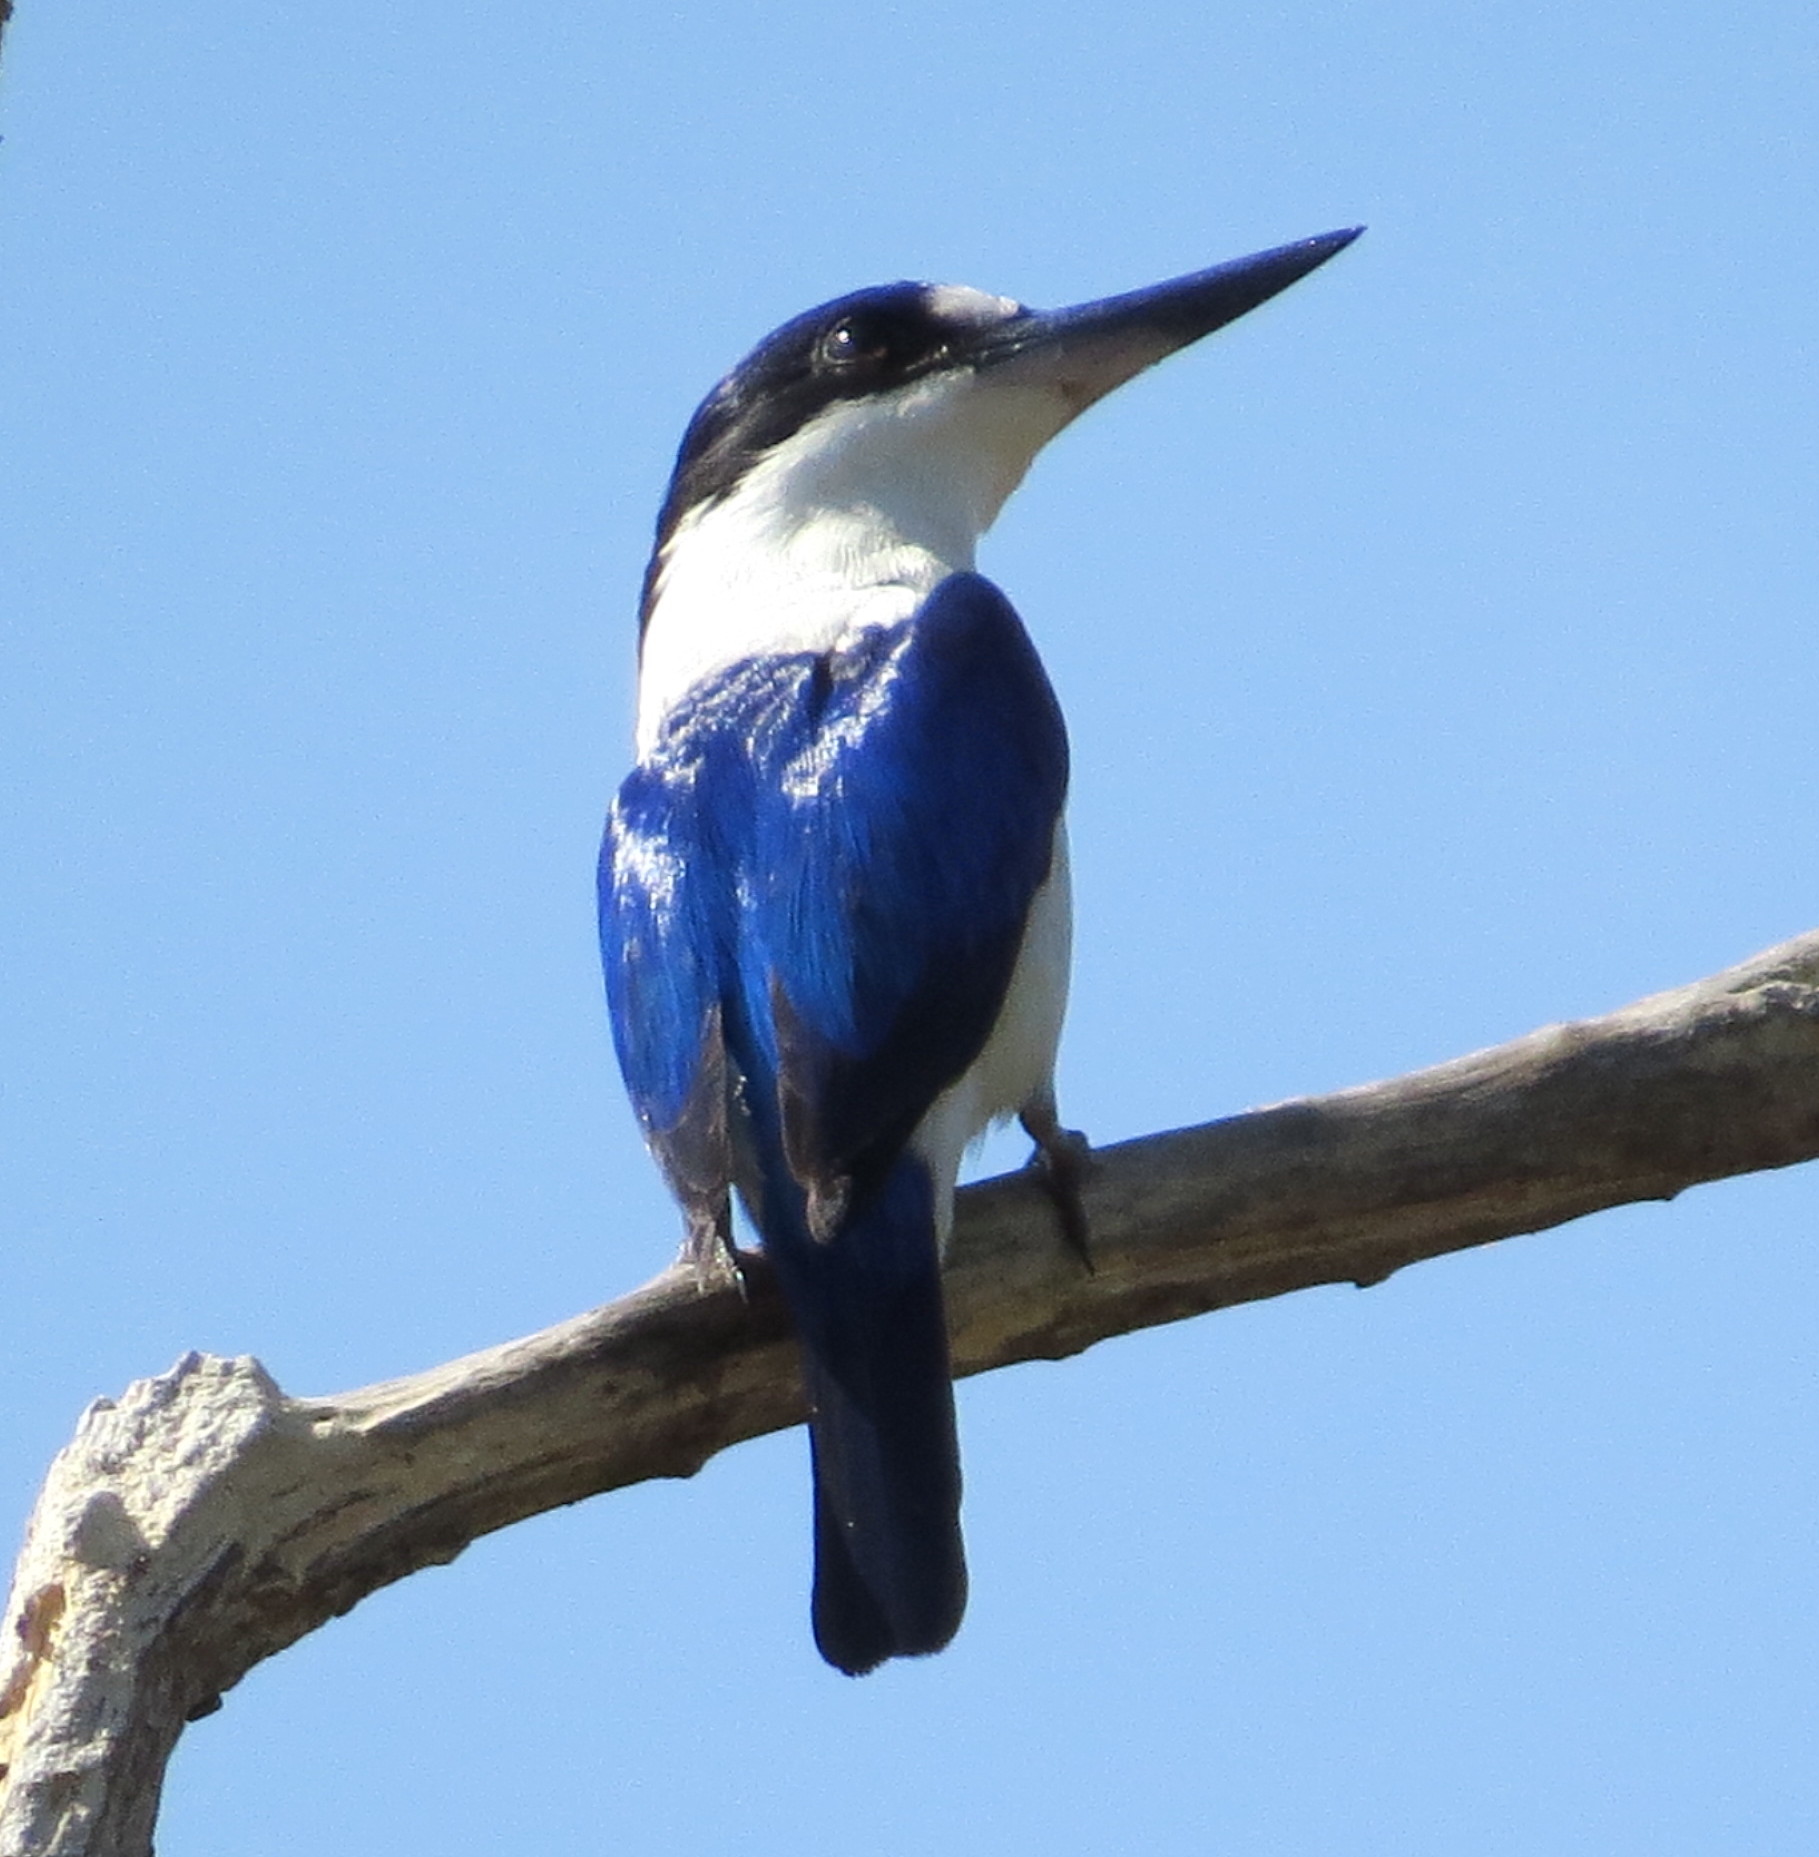 forest kingfisher